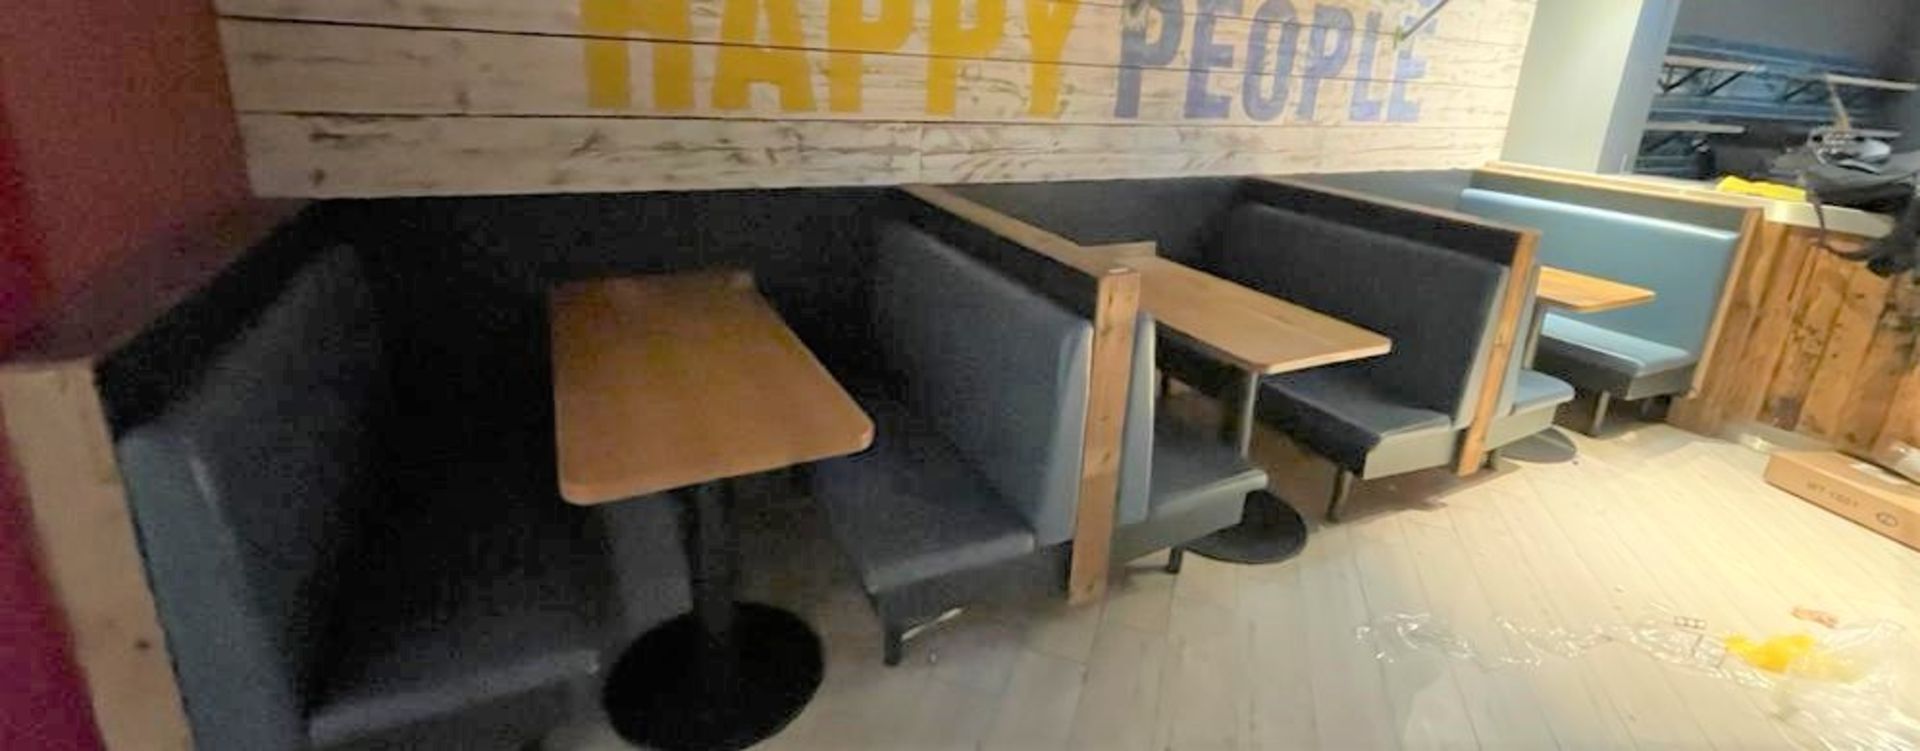 3 x Restaurant Leather Seating Booths With Oak Tables - Includes 6 x Seating Benches Upholstered - Image 2 of 11